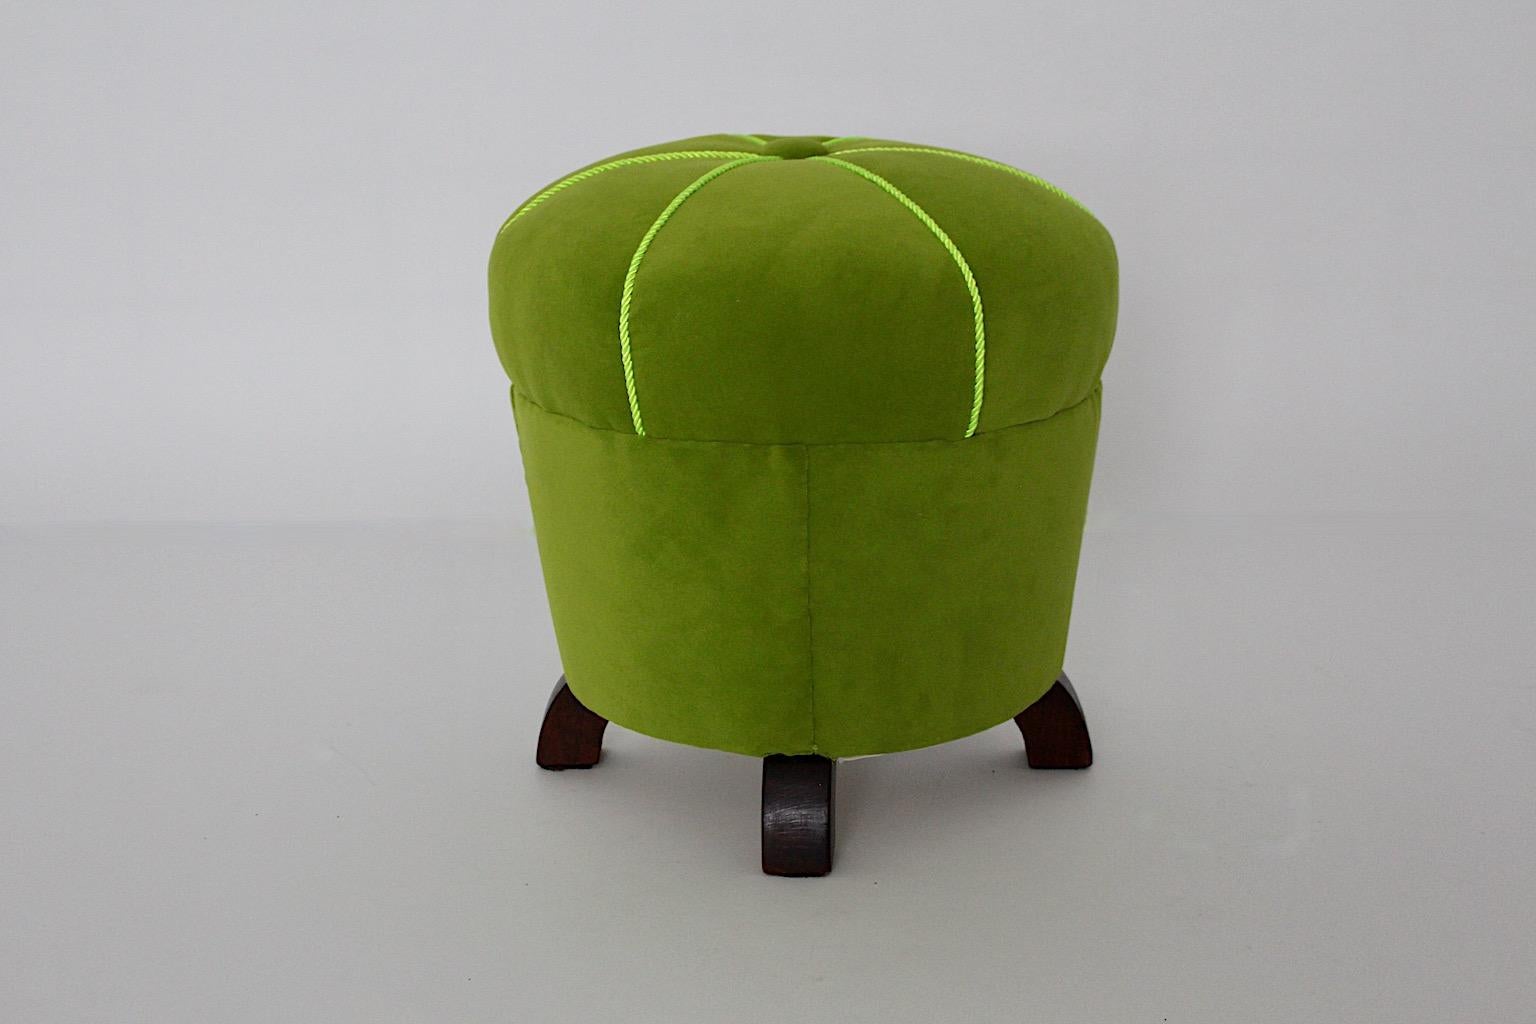 Art Deco Vintage Circular Green Stool Tabouret Pouf Velvet, 1930s, Austria In Good Condition For Sale In Vienna, AT